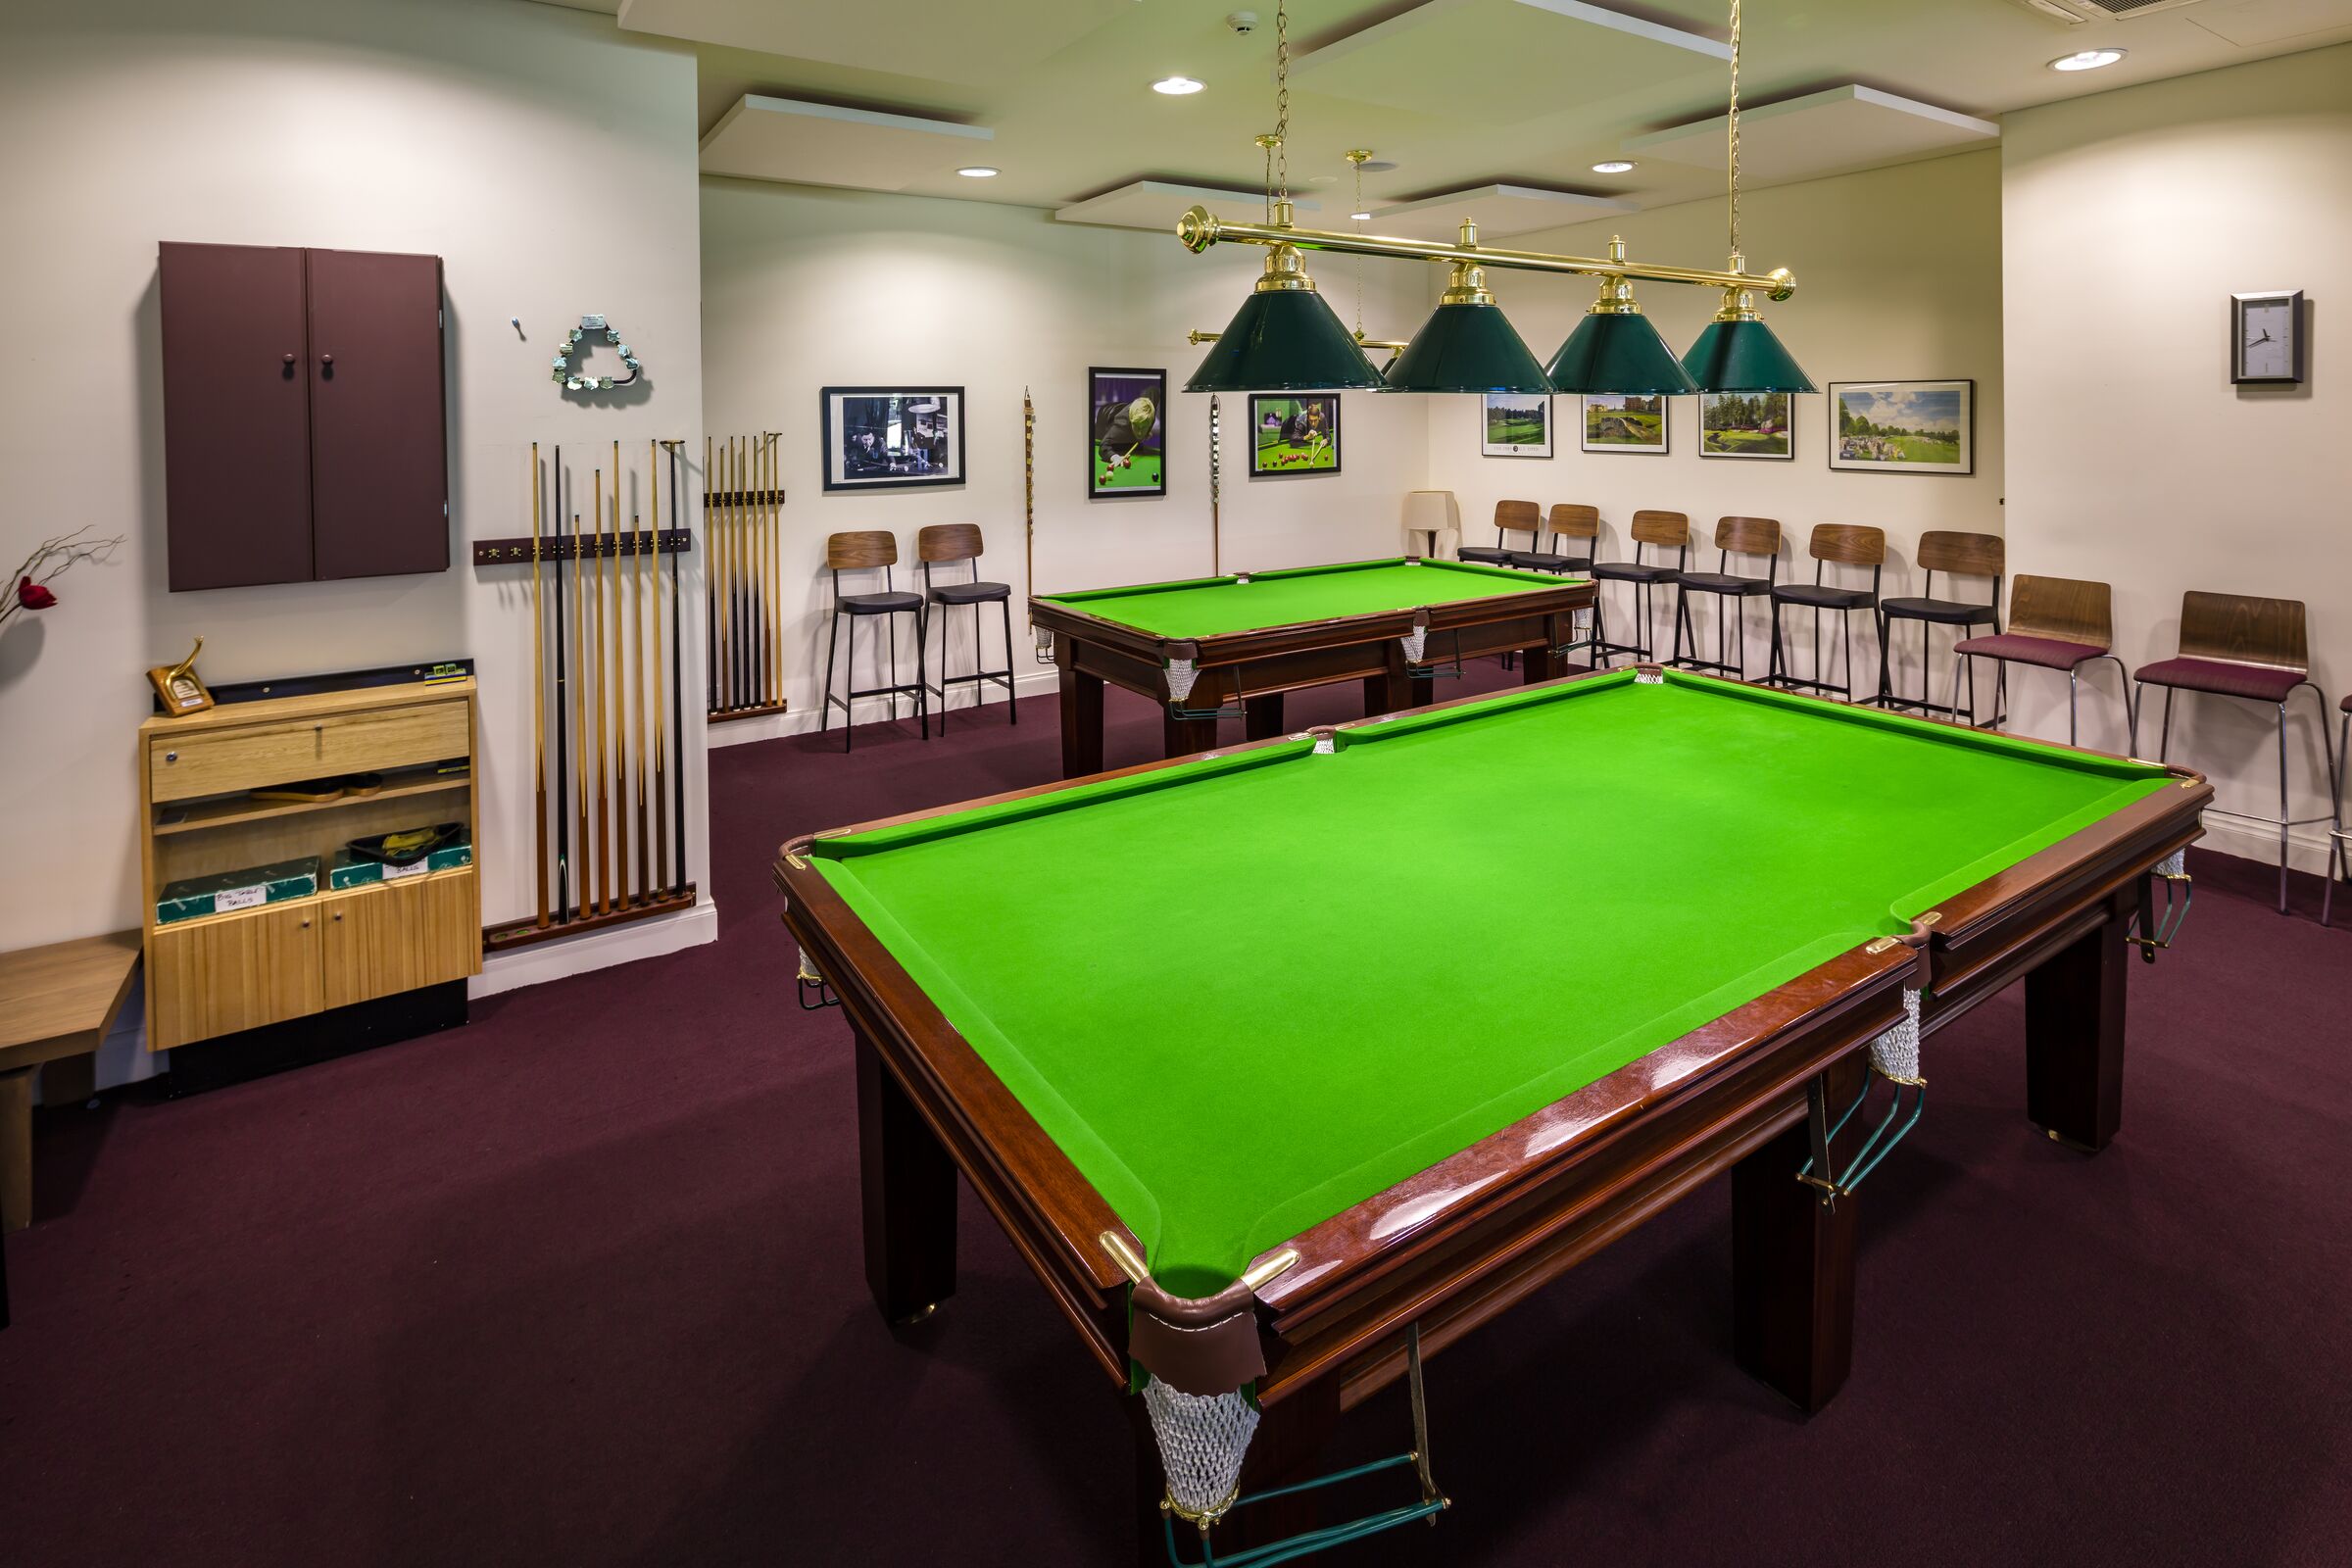 Waterford Park pool room with two pool tables and darts board